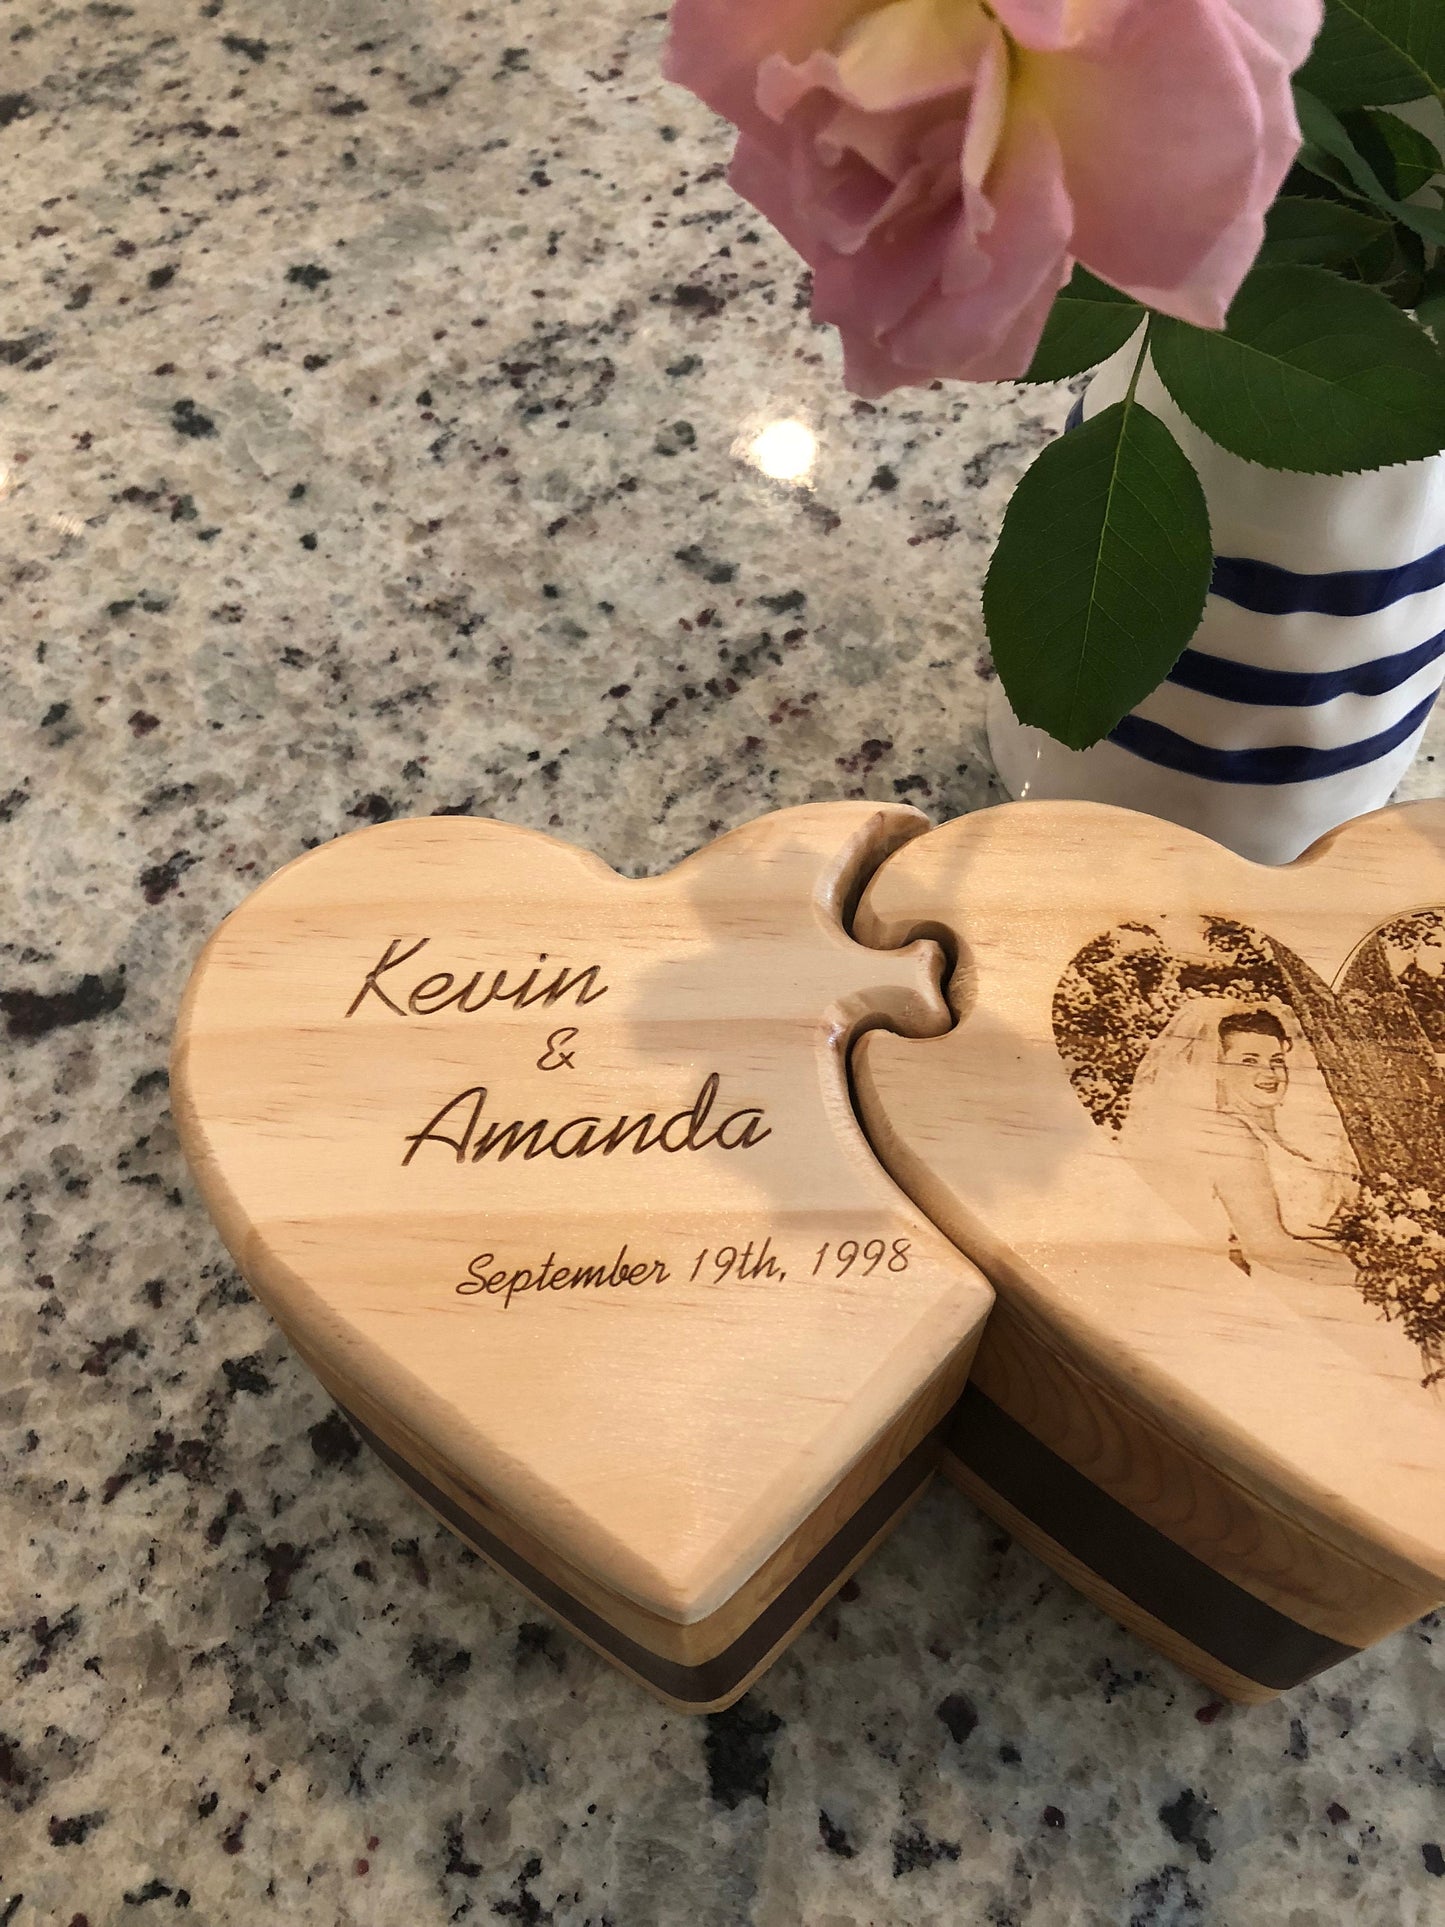 Wooden Box with Drawers, Double Heart, Jewelry Box, Handcrafted, Custom Box, Personalized Box, Handmade, Box, Home Decor, Engraved Stash Box